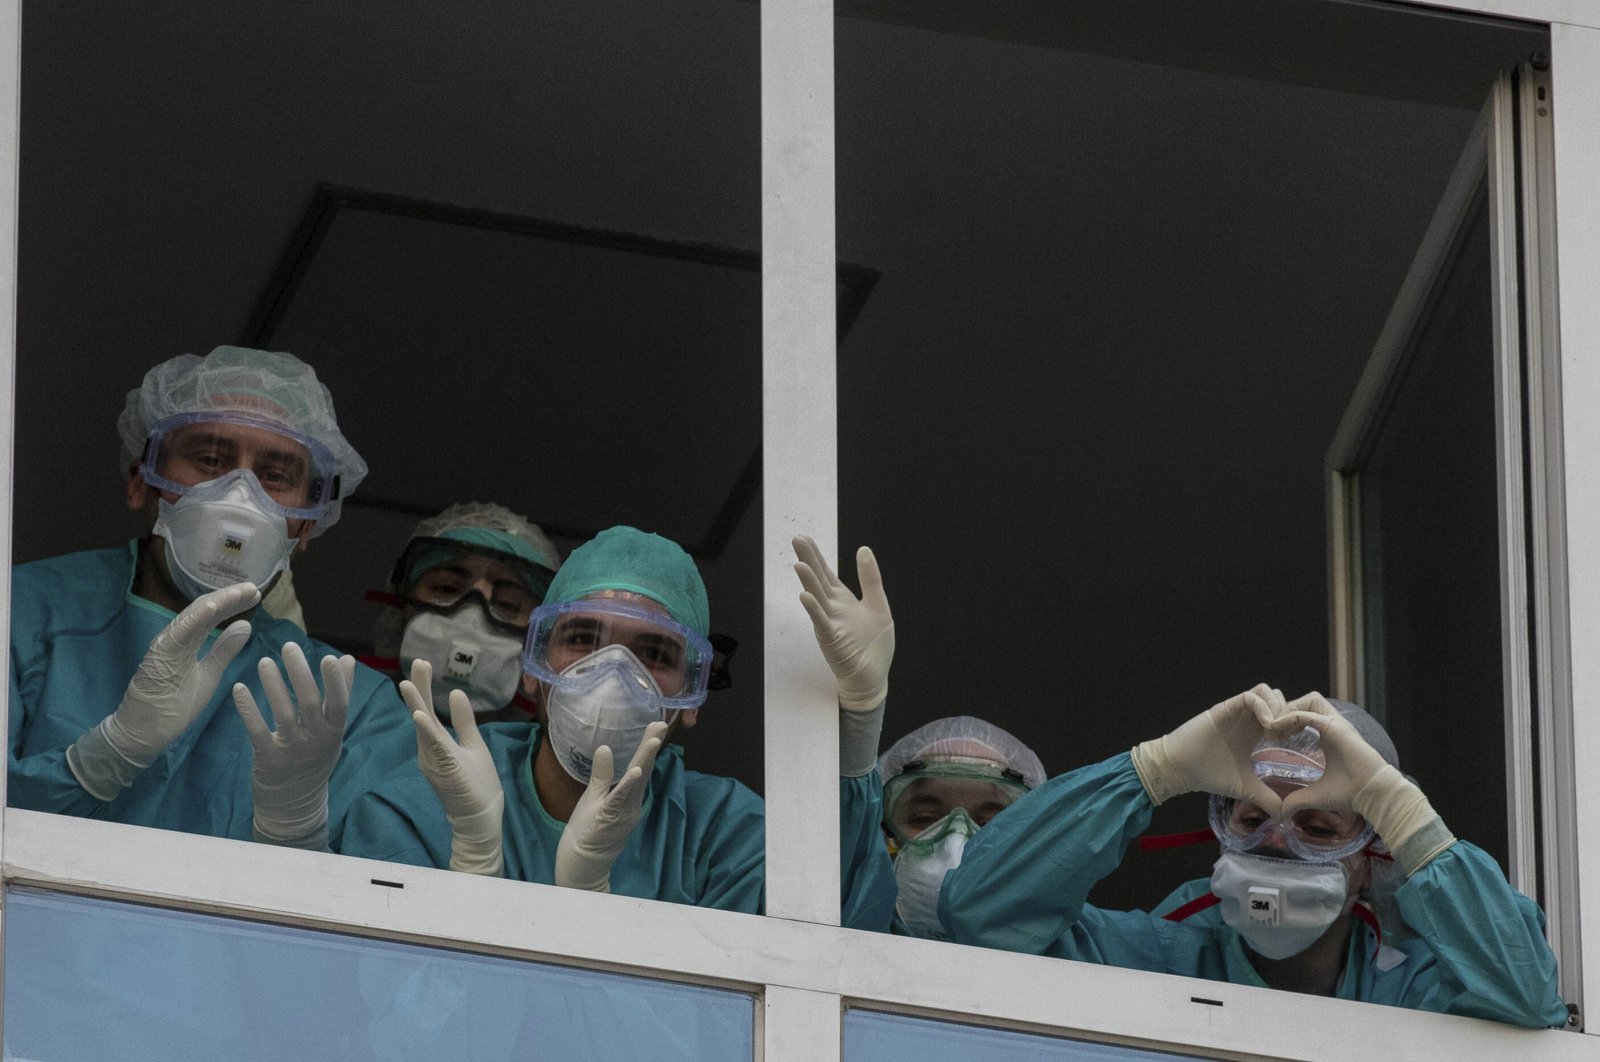 Health workers react as people applaud from their nearby houses in support of the medical staff, Madrid, April 15, 2020. (AP Photo)